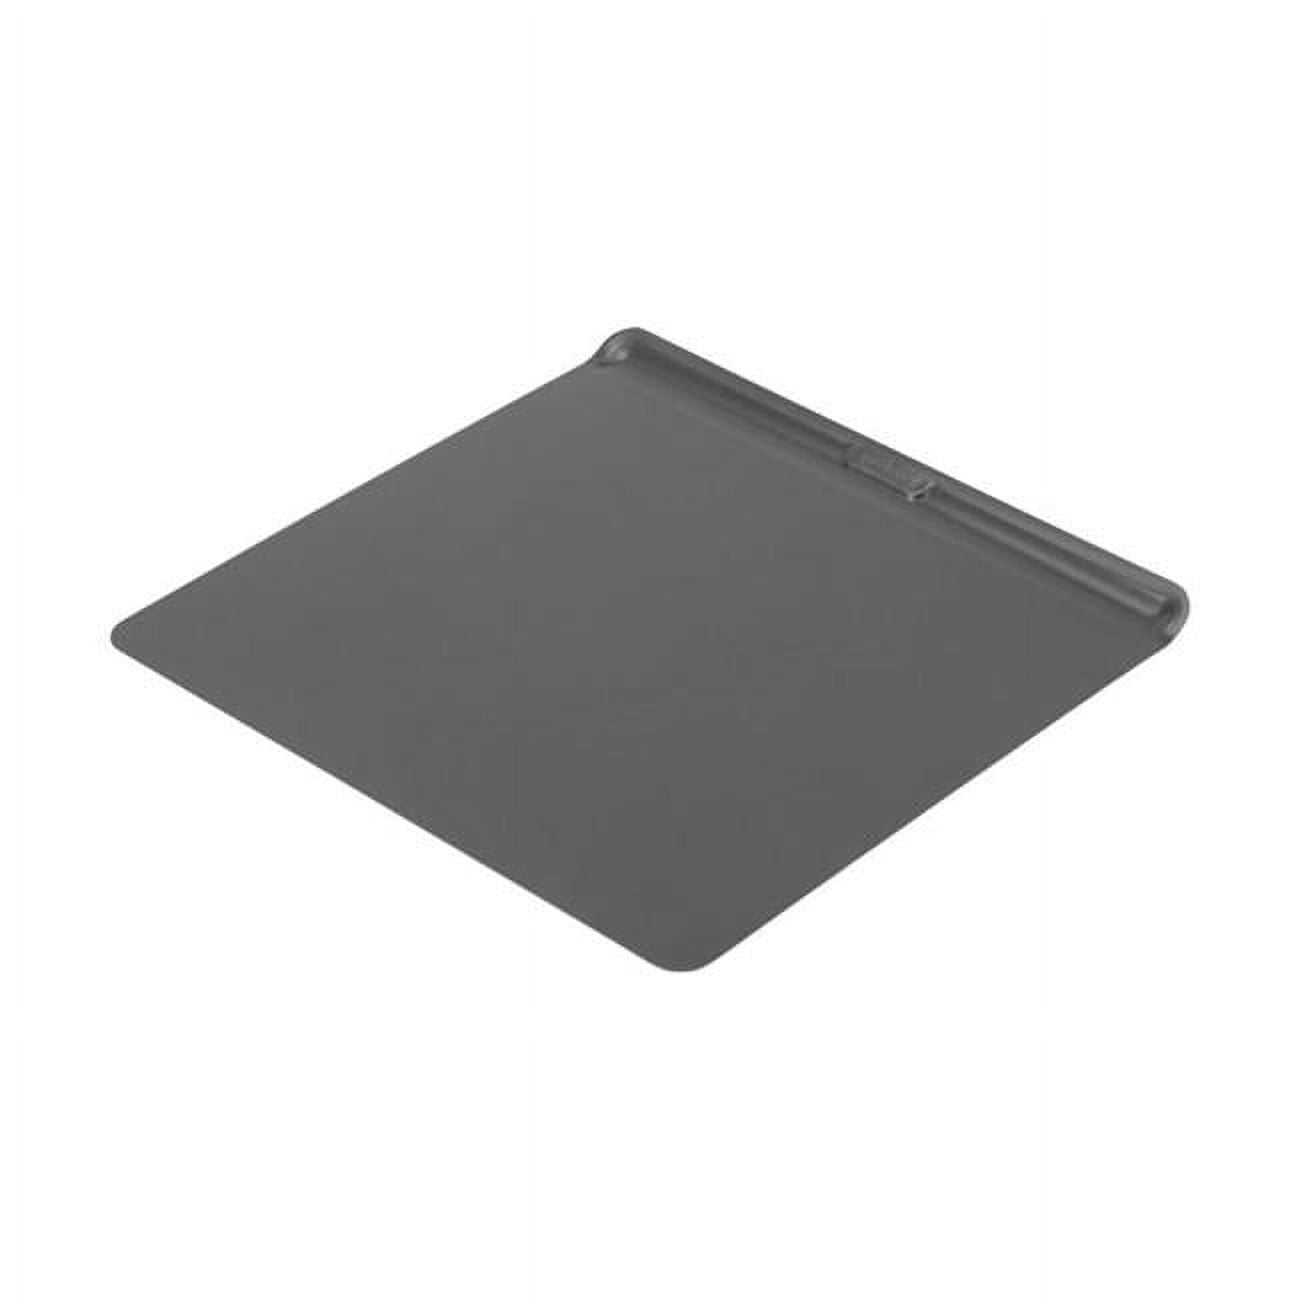 GoodCook AirPerfect Cookie Sheet